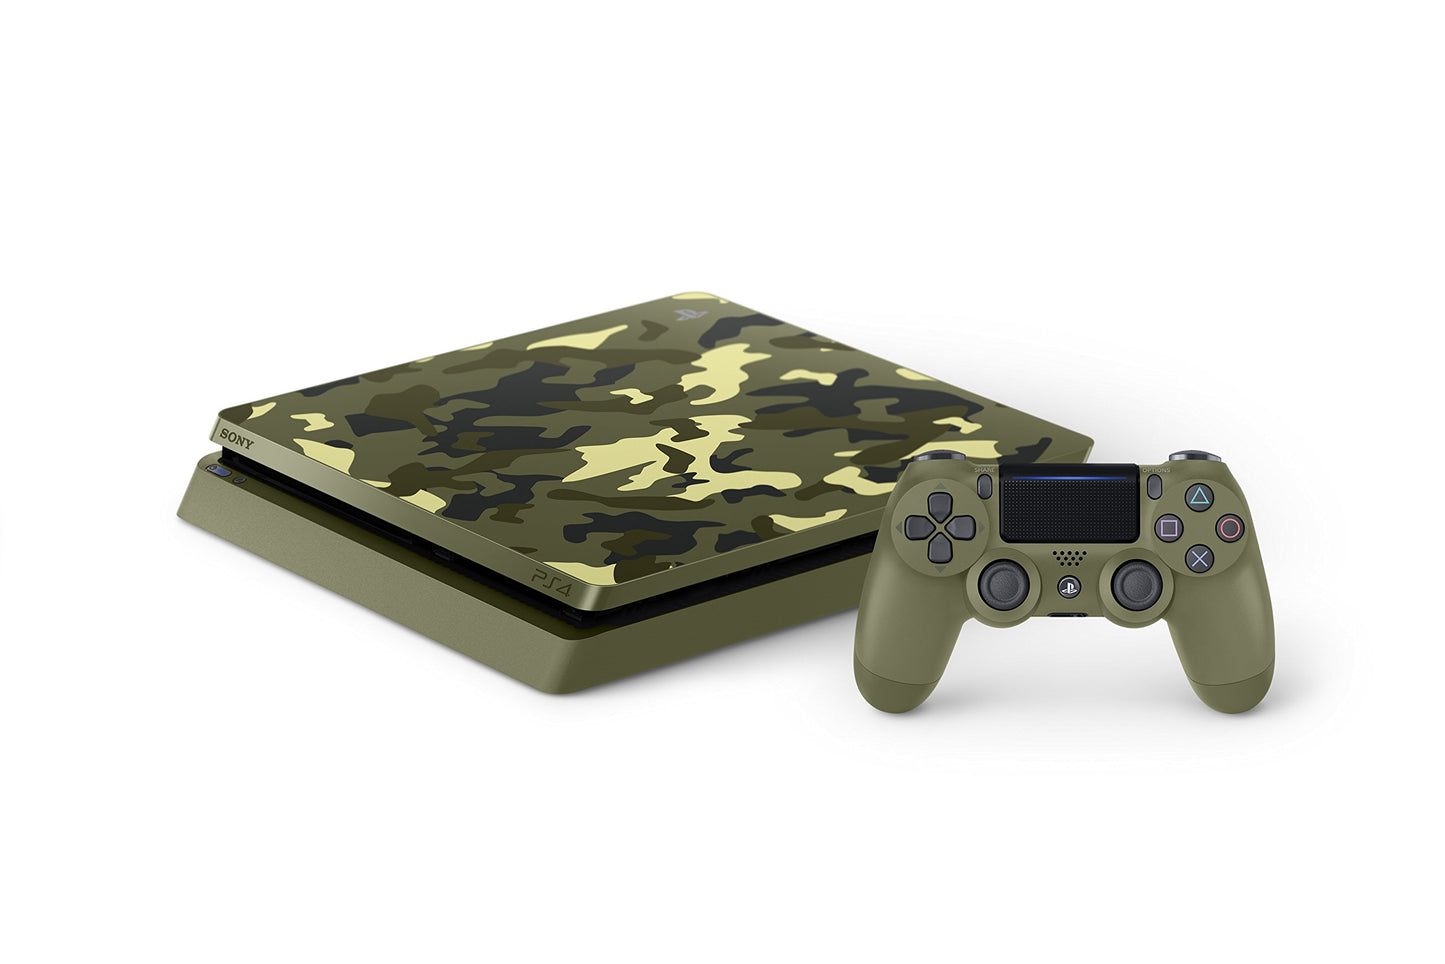 PlayStation 4 Slim 1TB Limited Edition Console - Call of Duty WWII Bundle [Discontinued]